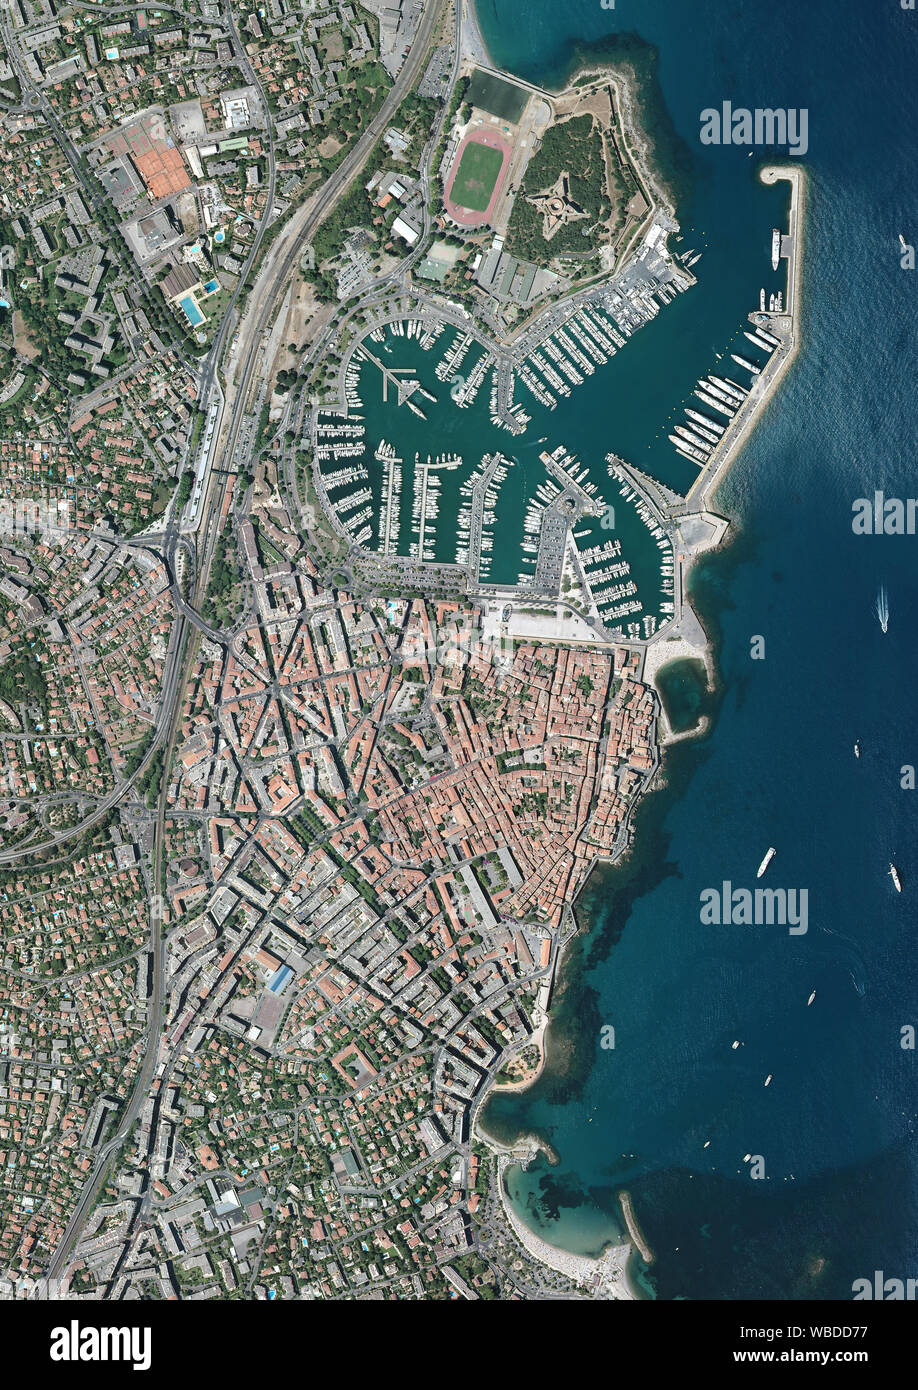 Aerial photography of Antibes Historical Center on the French Riviera in Southern France. Image taken in 2017. Stock Photo